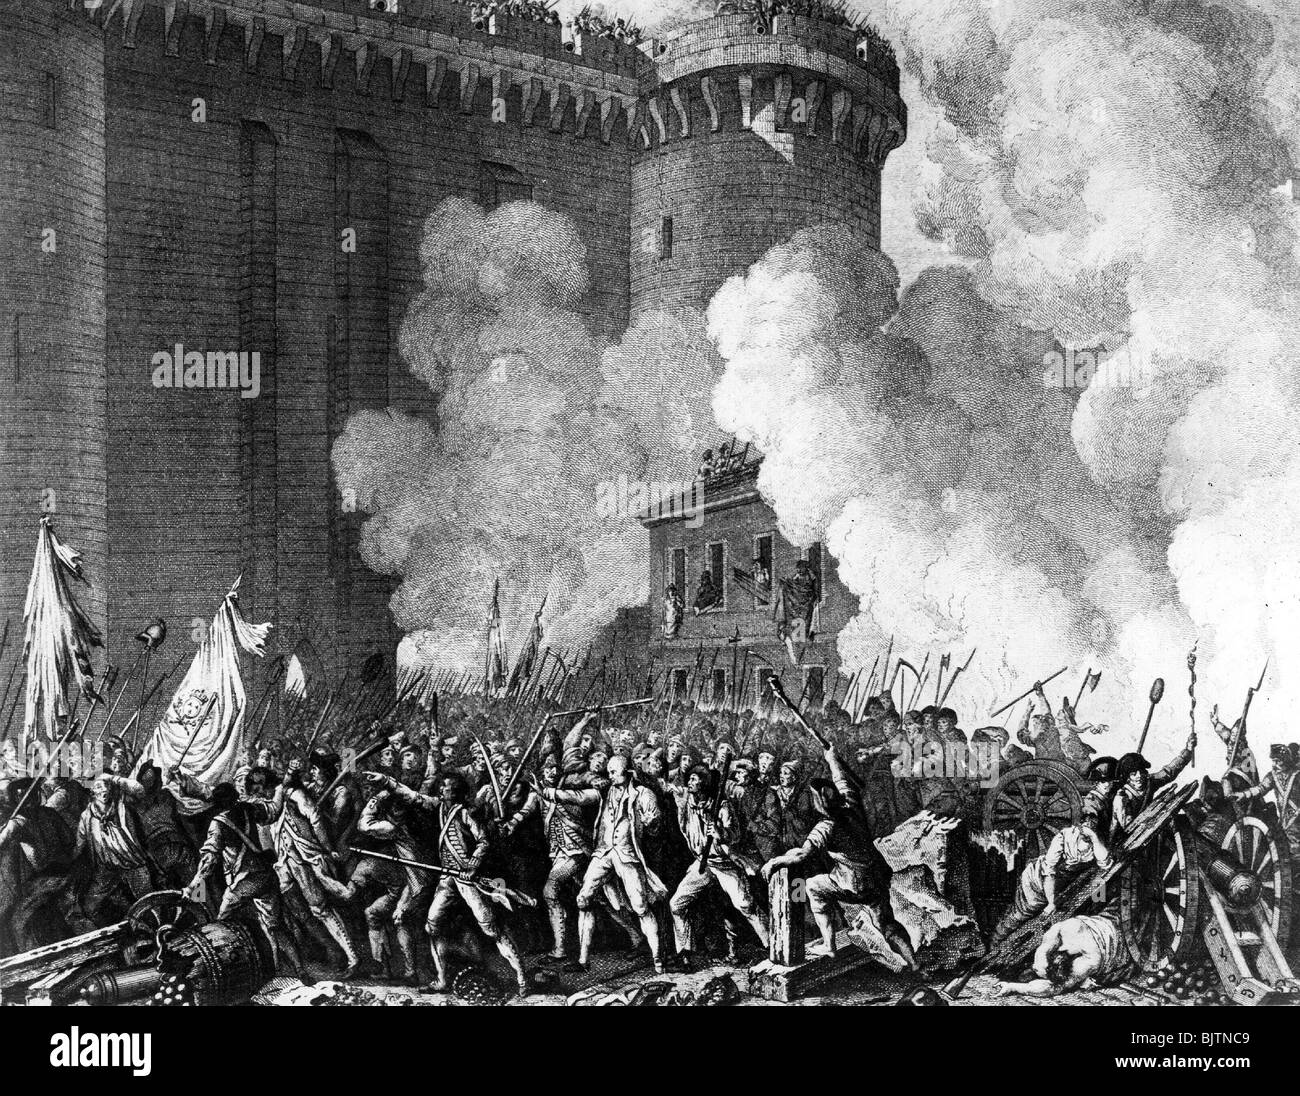 geography / travel, France, French Revolution 1789, storming of the Bastille 14.7.1789, capture of Gouverneur de Launay, wood engraving after drawing by Prieur, 18th century, historic, historical, revolution, revolt, insurgency, revolts, rebellion, protest, national uprising, national uprisings, riot, riots, insurgent, insurgents, rebel, rebels, revolter, revolters, street fighting, street fightings, people, Stock Photo